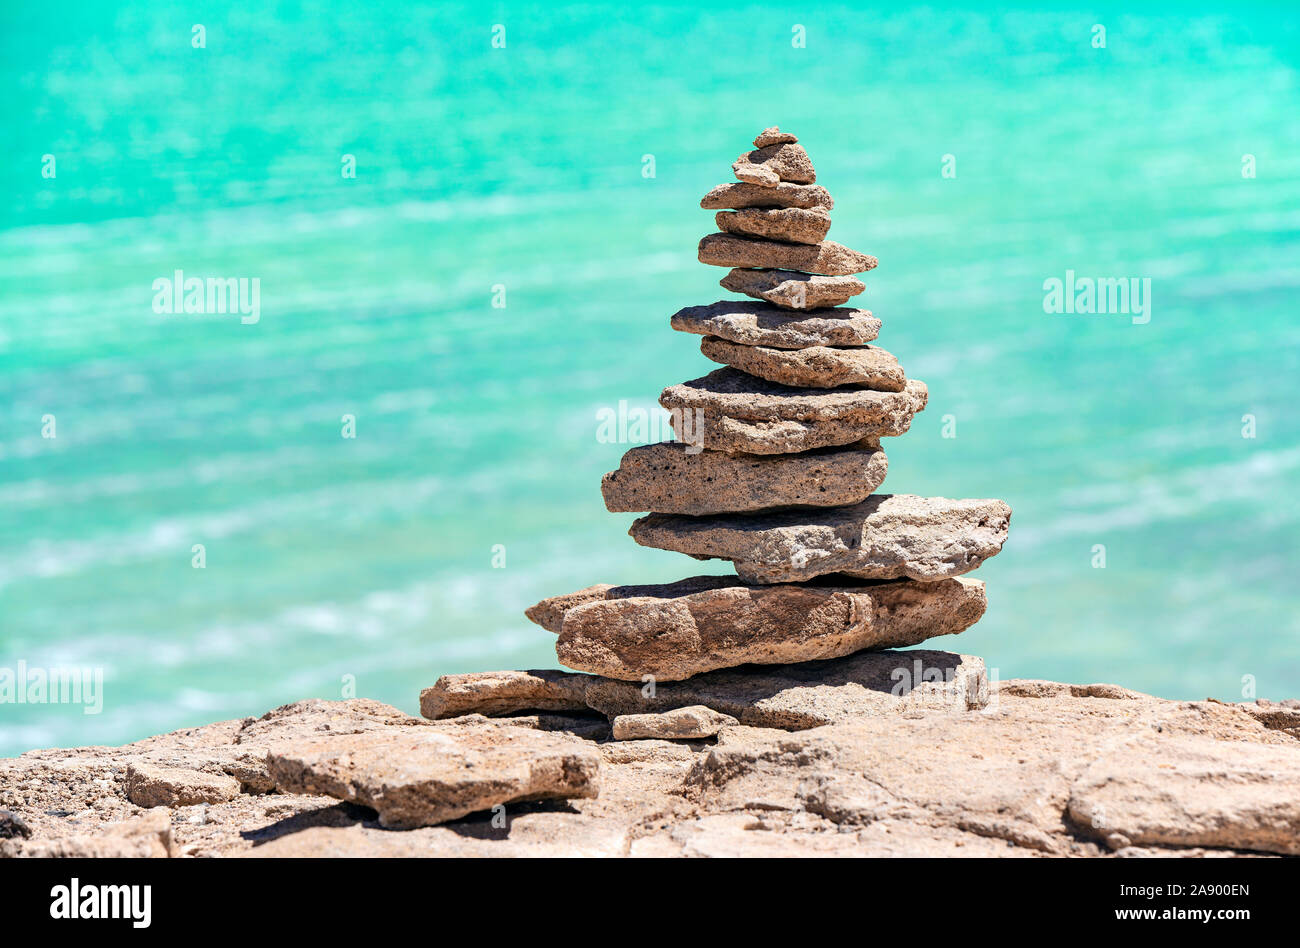 A wish stone pyramid by the Laguna Verde (green lagoon) with its turquoise green waters by the Uyuni salt flat, Bolivia. Stock Photo